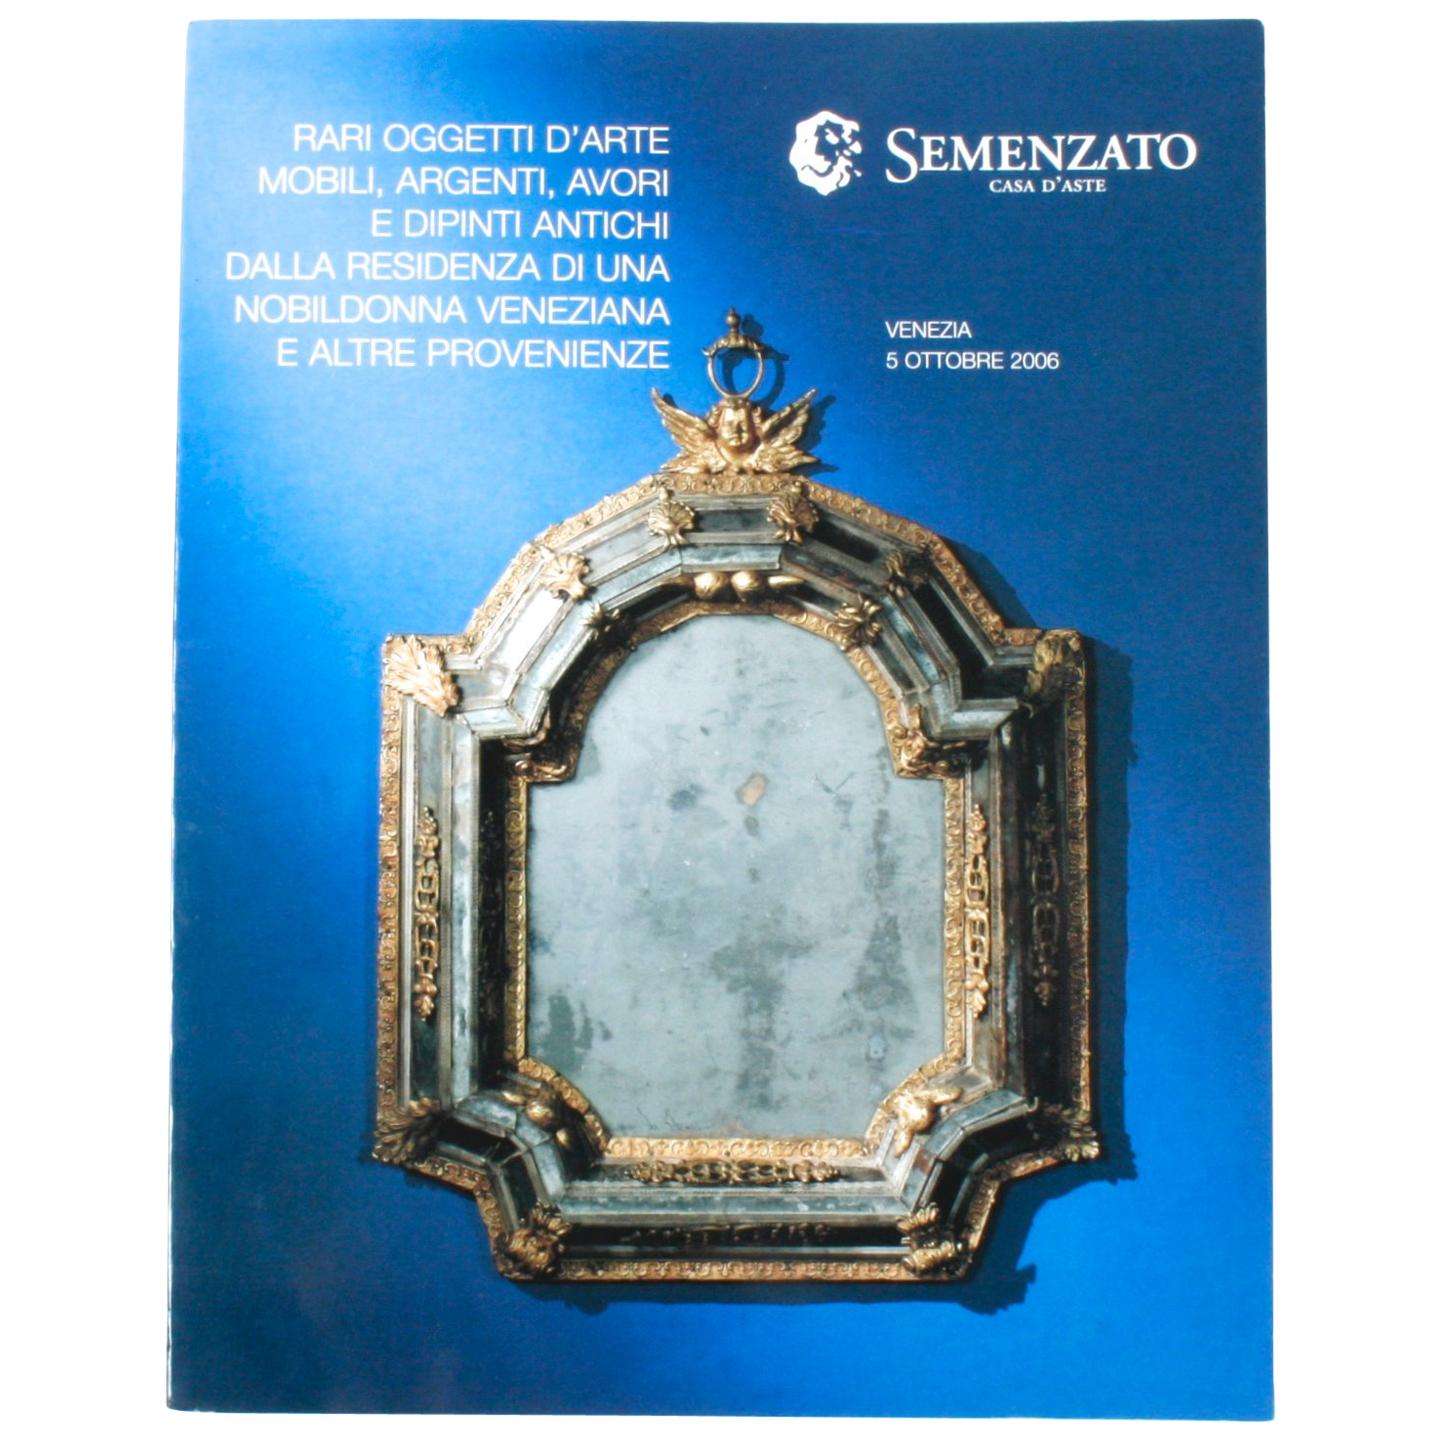 Auction Catalogue of Italian Fine Art, Silver, Ivory, and Venetian Objects, 2006 For Sale